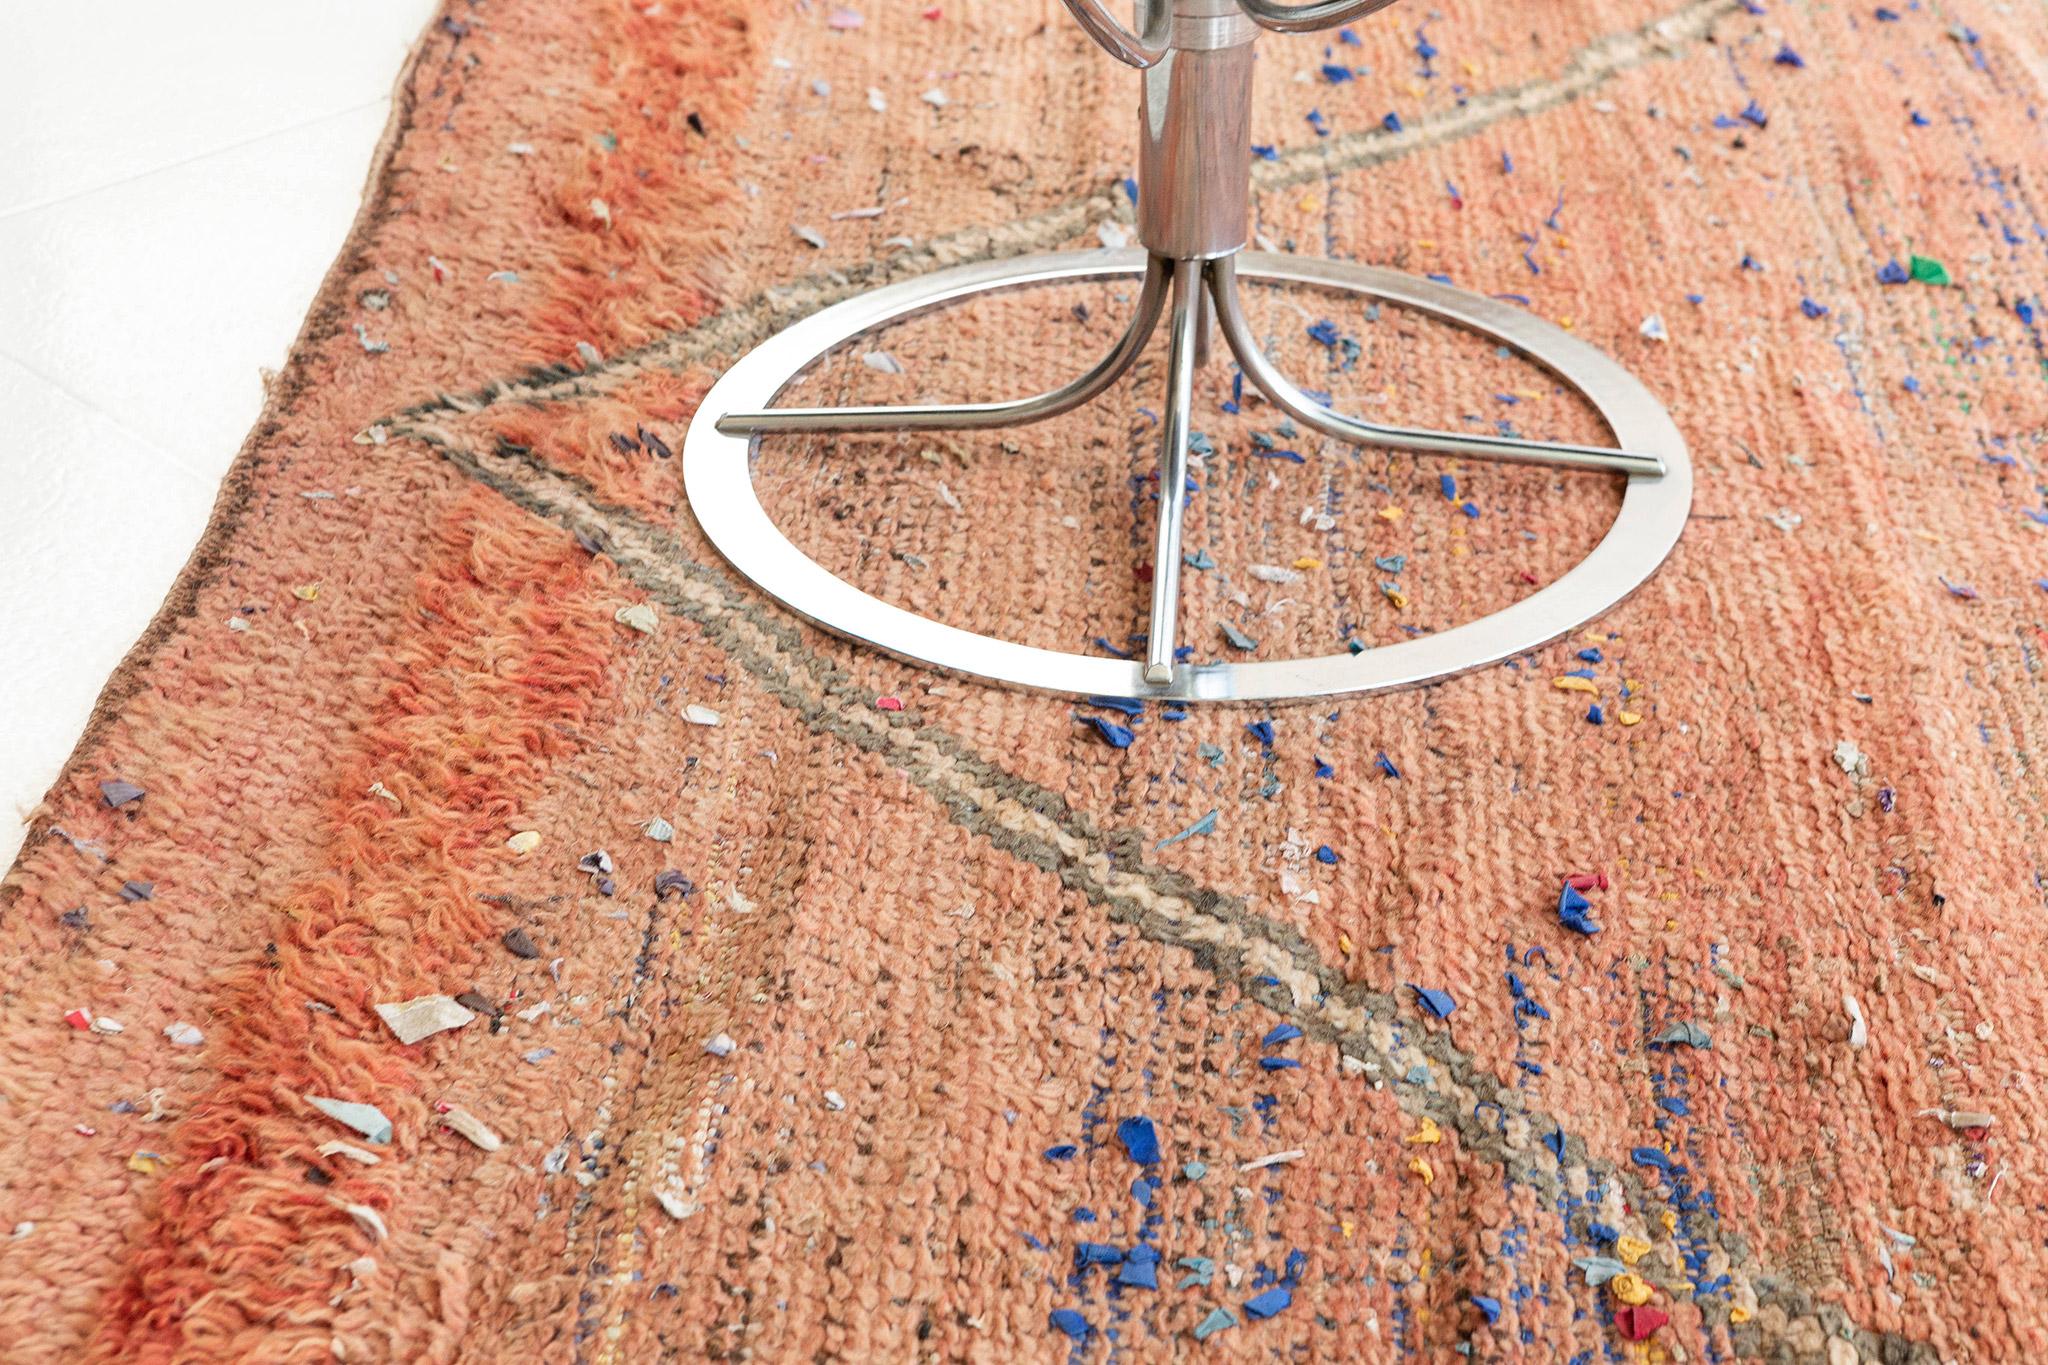 Featuring the most sought after clay palette, this breath-taking Morrocan rug made from hand-spun wool will certainly captivate every stylish mind. The fish symbol featured in this masterful design will exude sophistication as an effect of